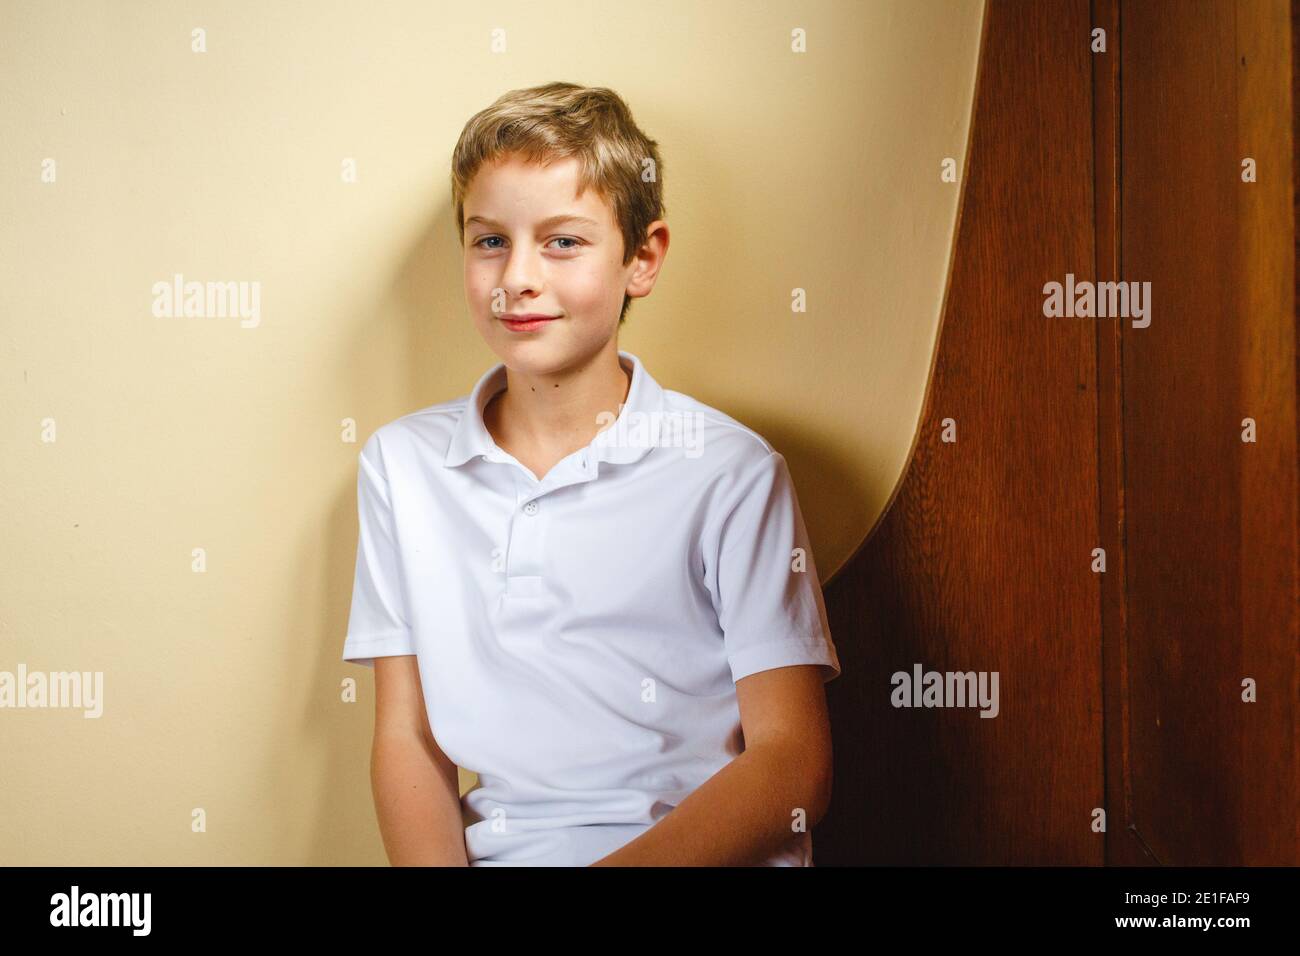 A young boy sits on wooden bench leaning against wall with direct gaze Stock Photo